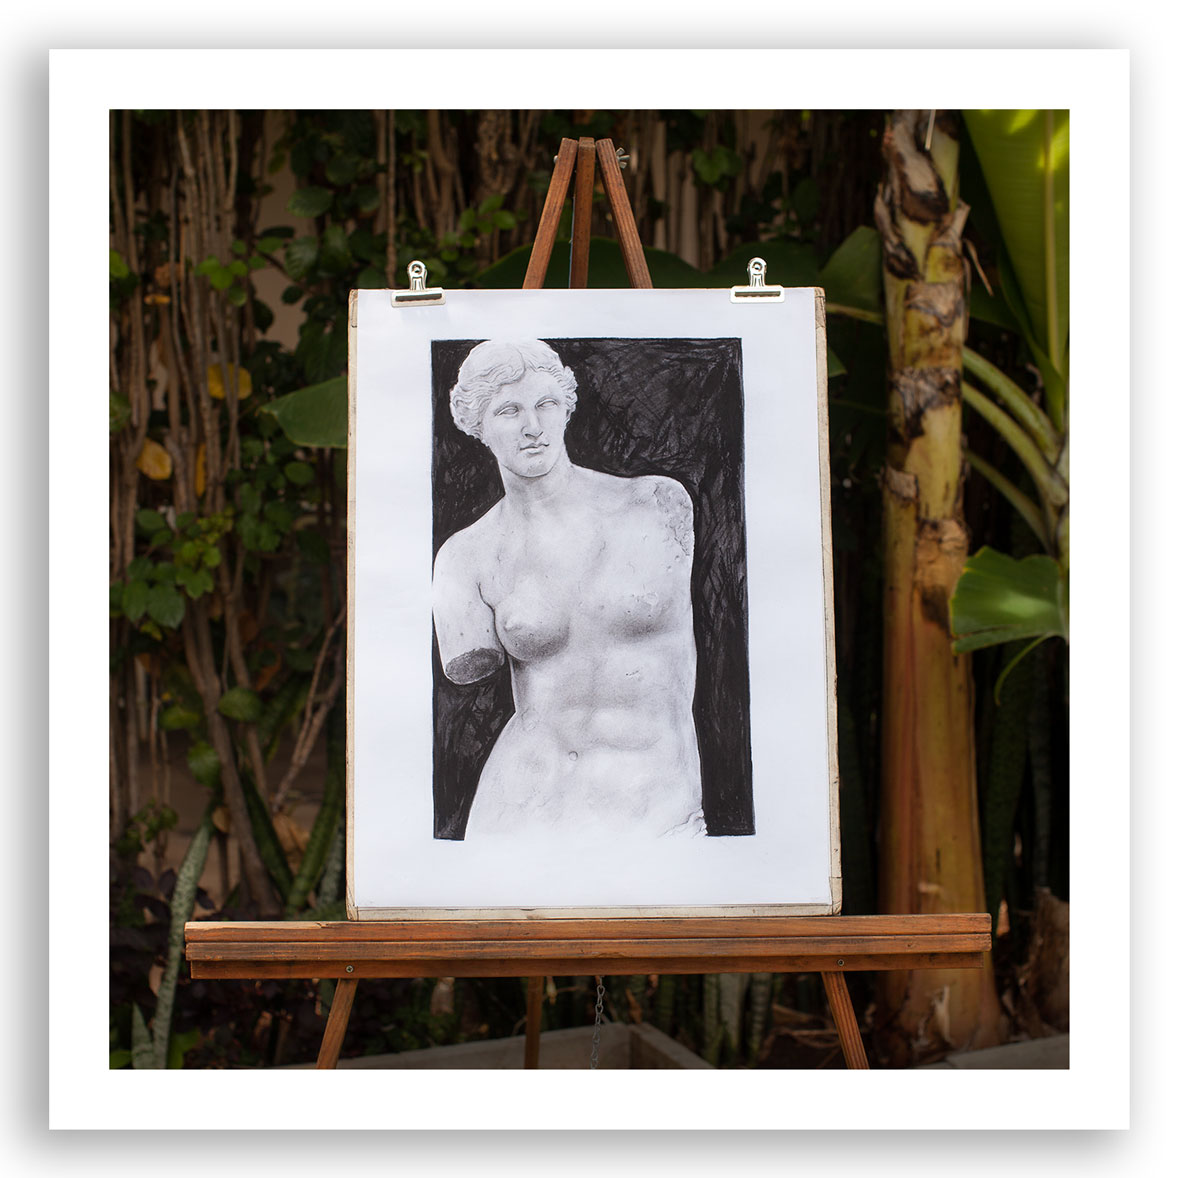 Charcoal Drawing of Venus de Milo by Michael Daly Artist, 2018. Charcoal on Paper.